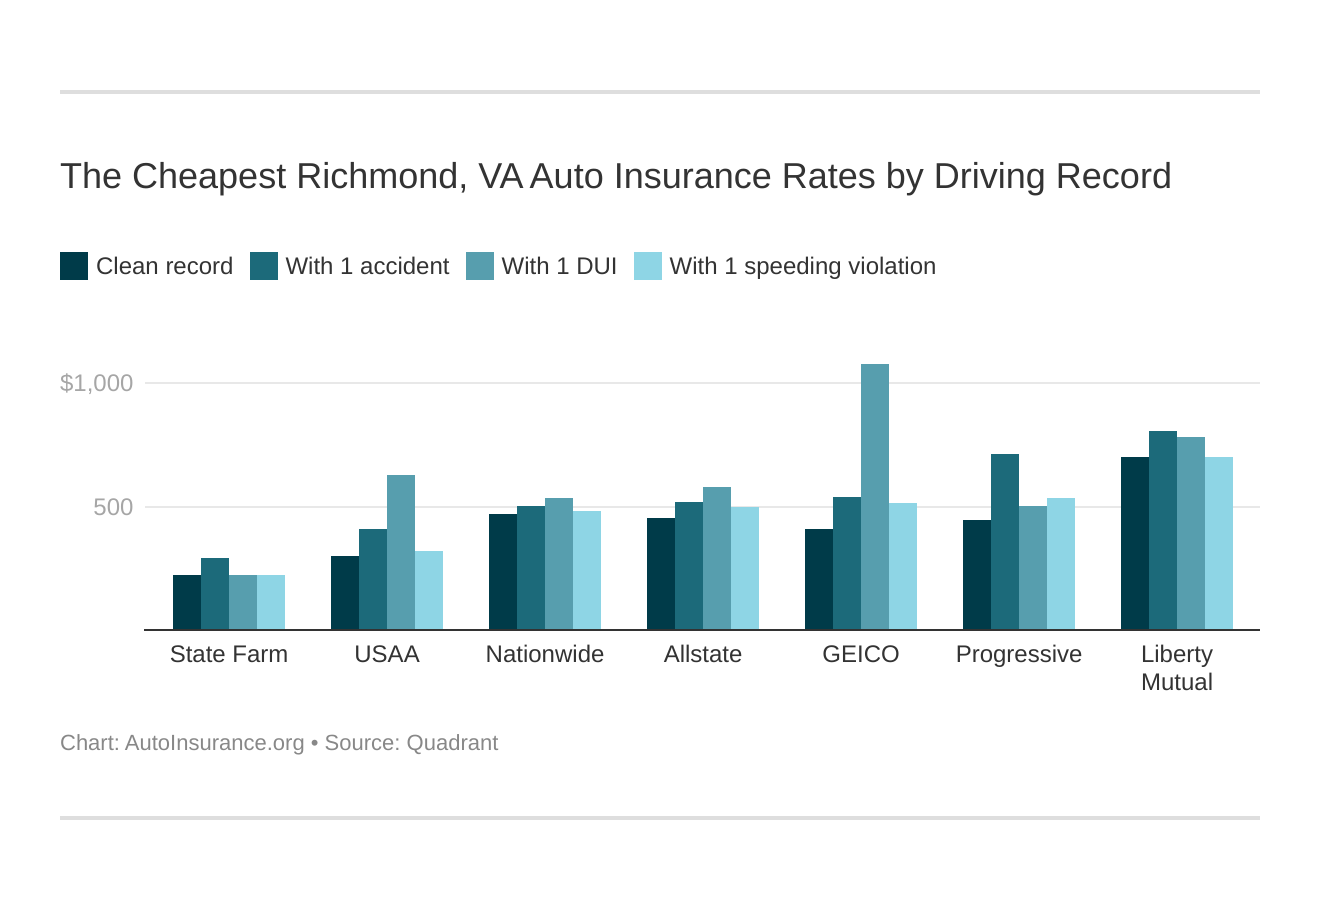 The Cheapest Richmond, VA Auto Insurance Rates by Driving Record